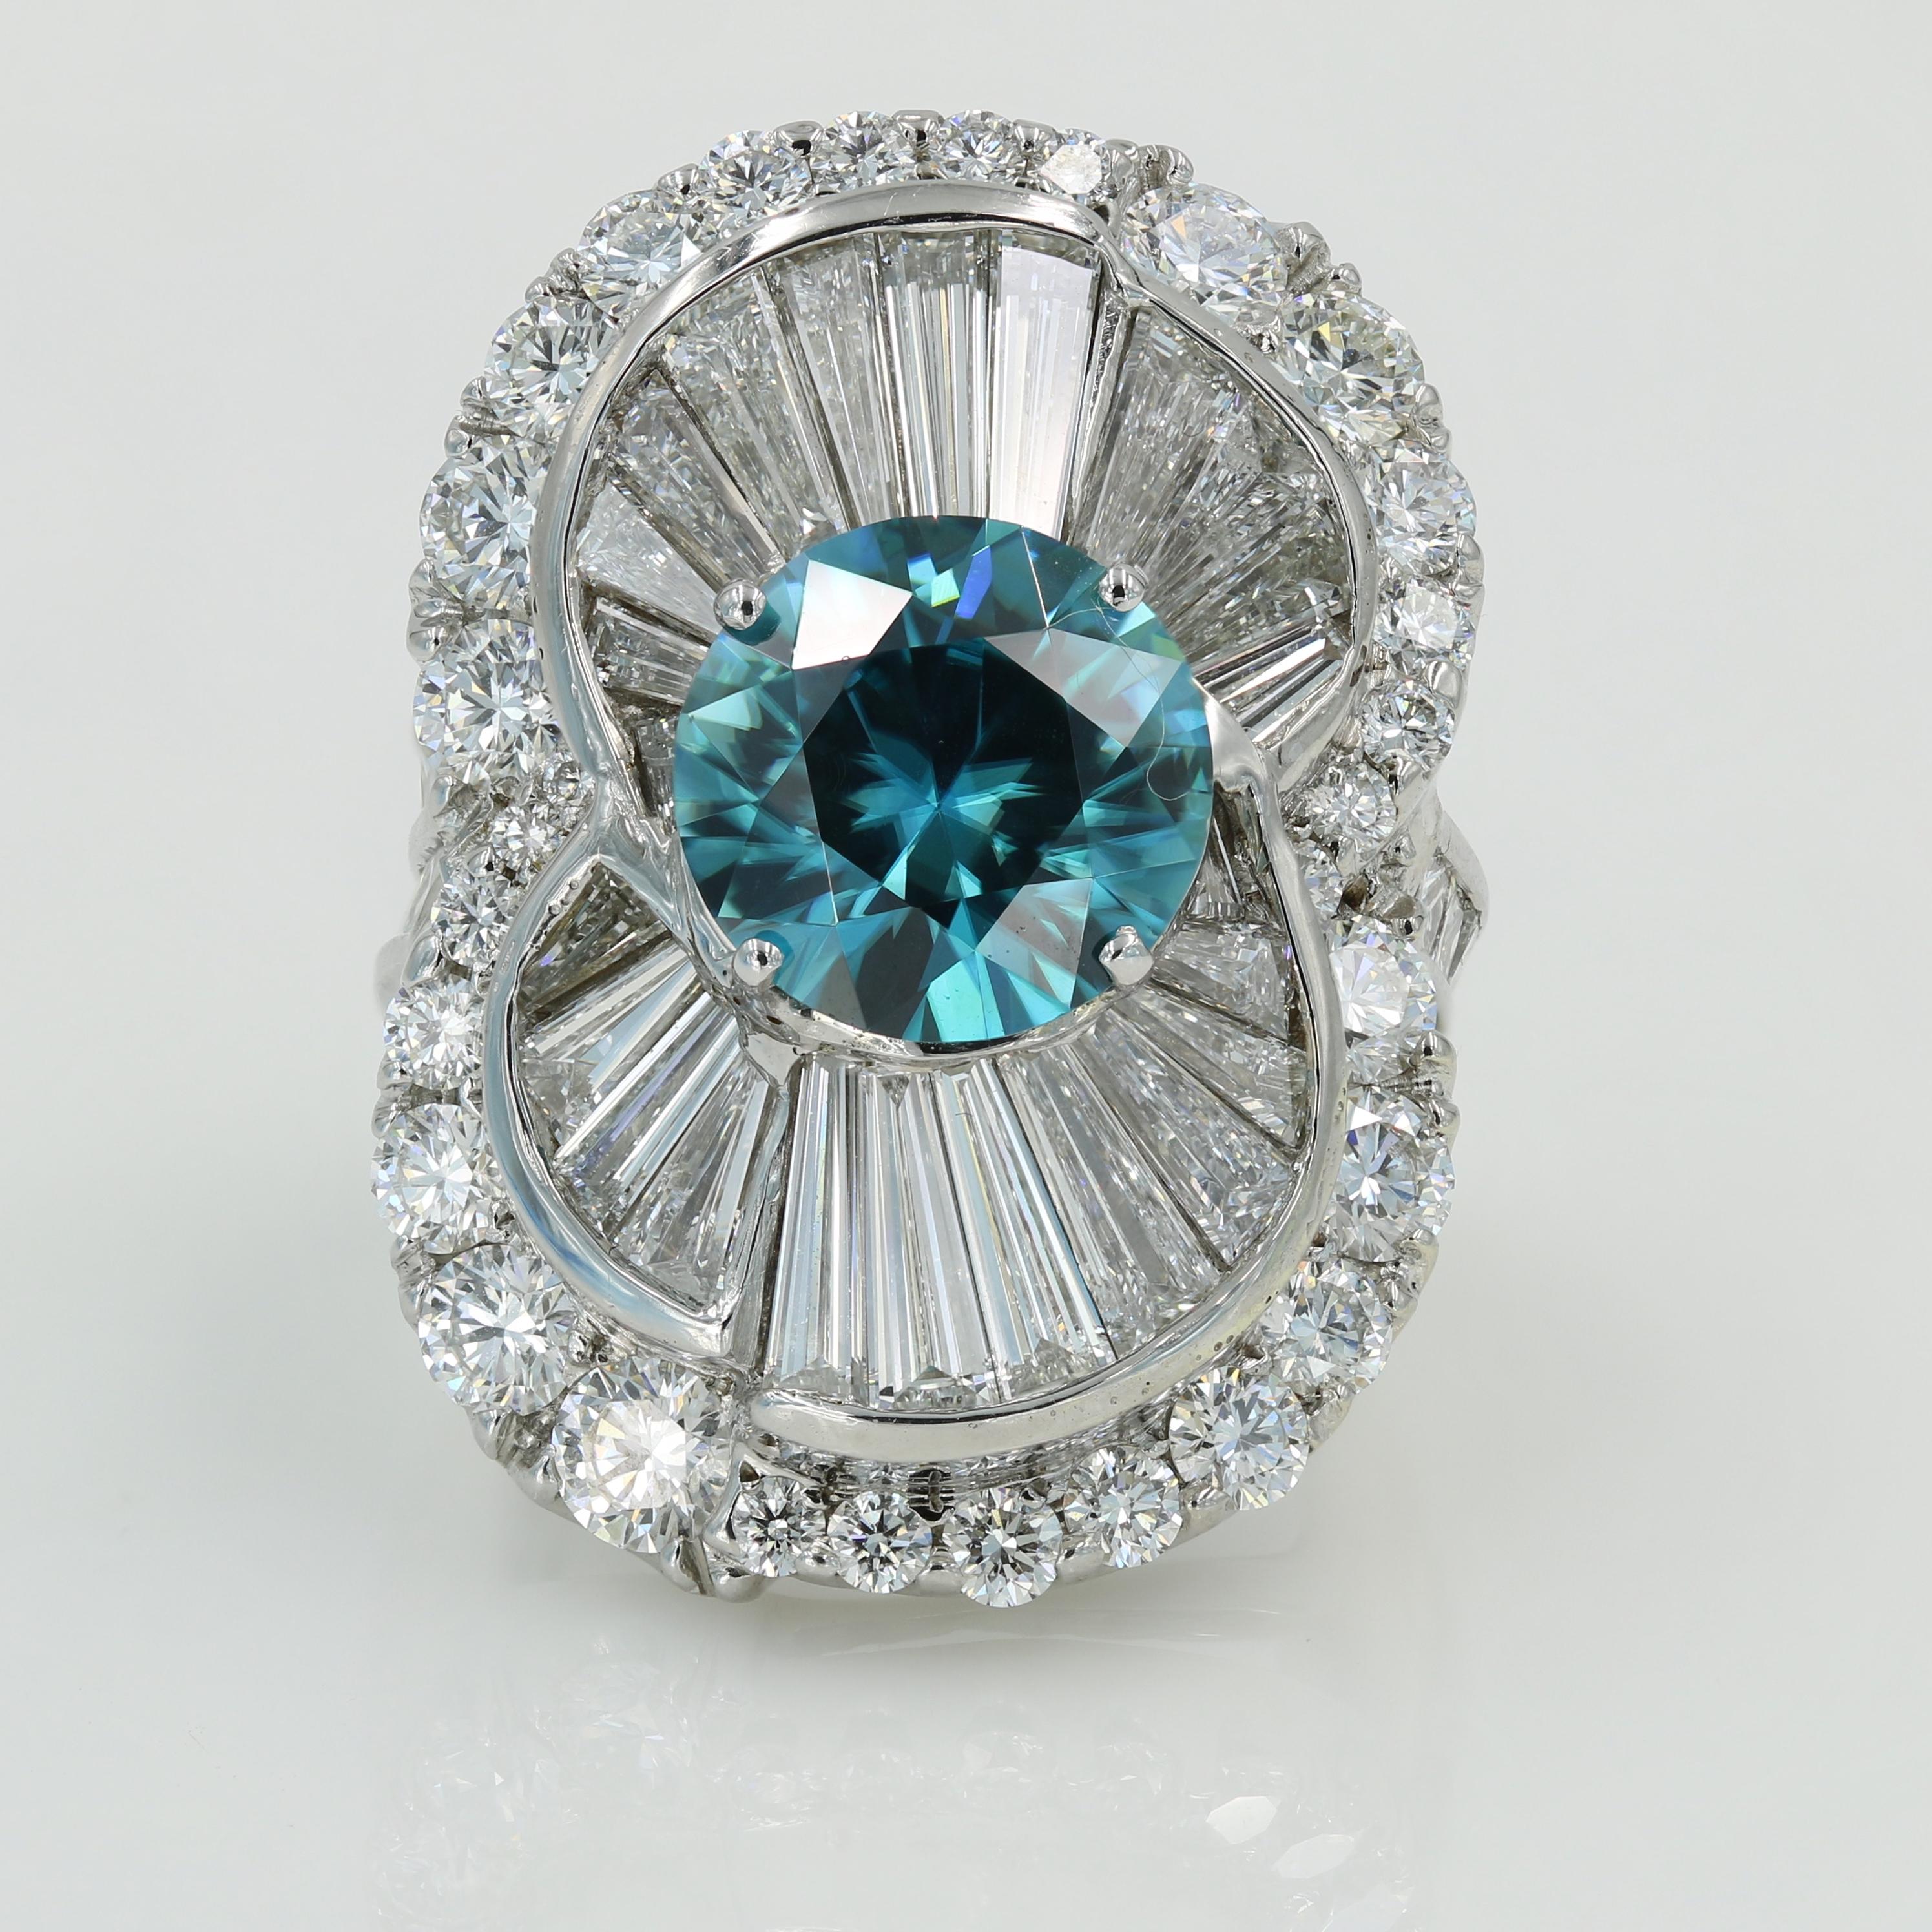 Lester Lampert original design 6.92cts round cut Blue Zircon ring in 18kt white gold set with 24 very large taperer Baguette cut diamonds weighing 3.68cts total, 20 Princess cut diamonds weighing 1.71cts total & 32 Ideal cut Round diamonds weighing